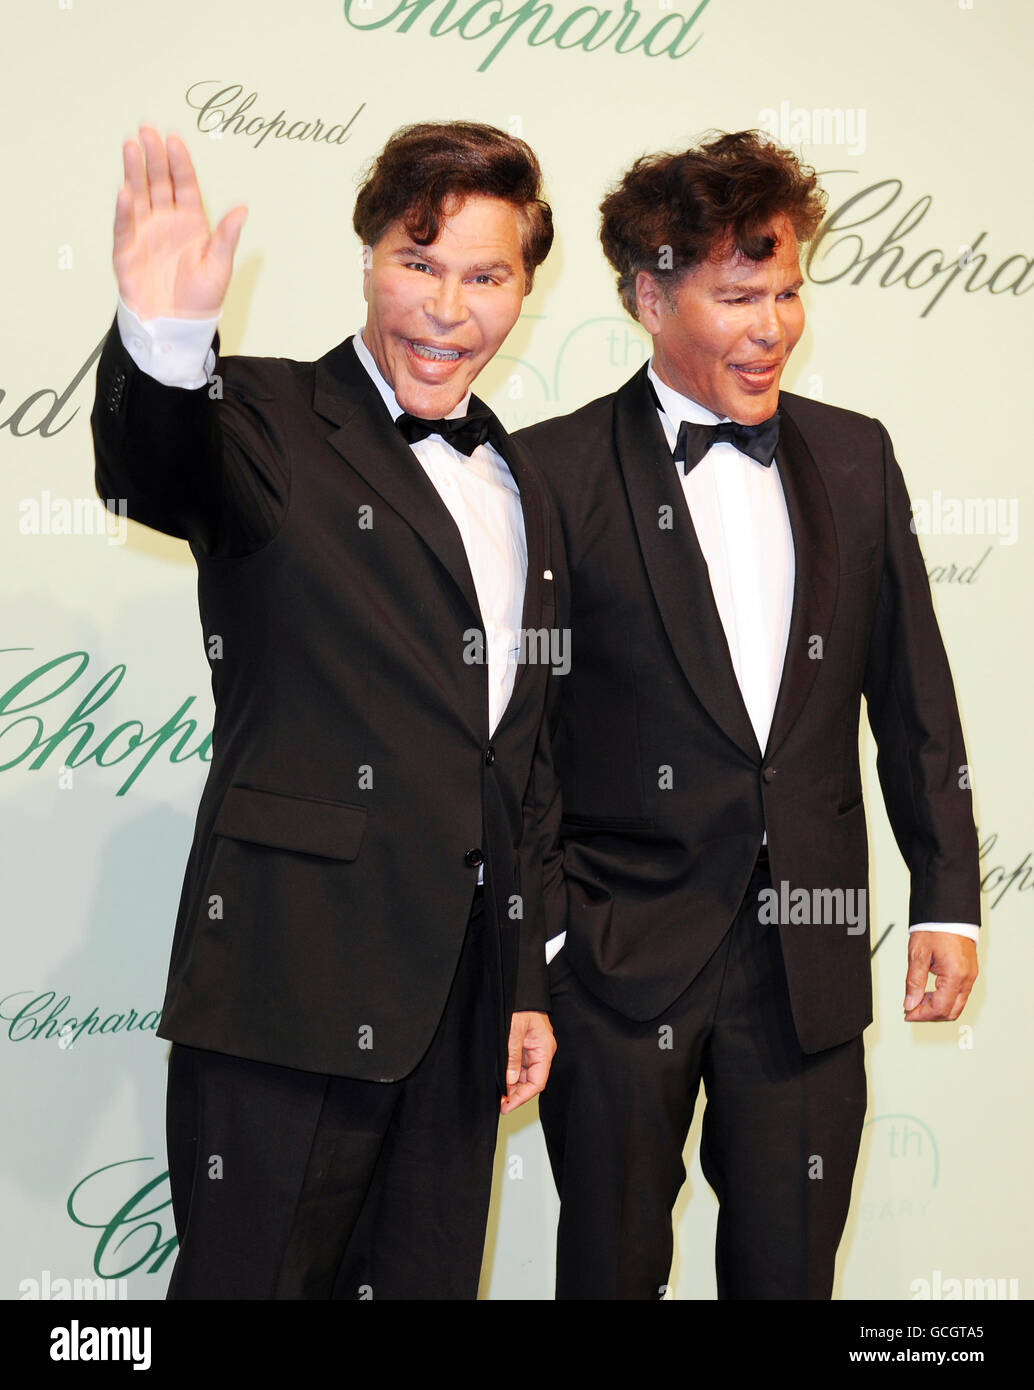 Igor and Grichka Bogdanoff, former French television star brothers, attend the Chopard 150th birthday party event during the 63rd Cannes Film Festival, France. Stock Photo